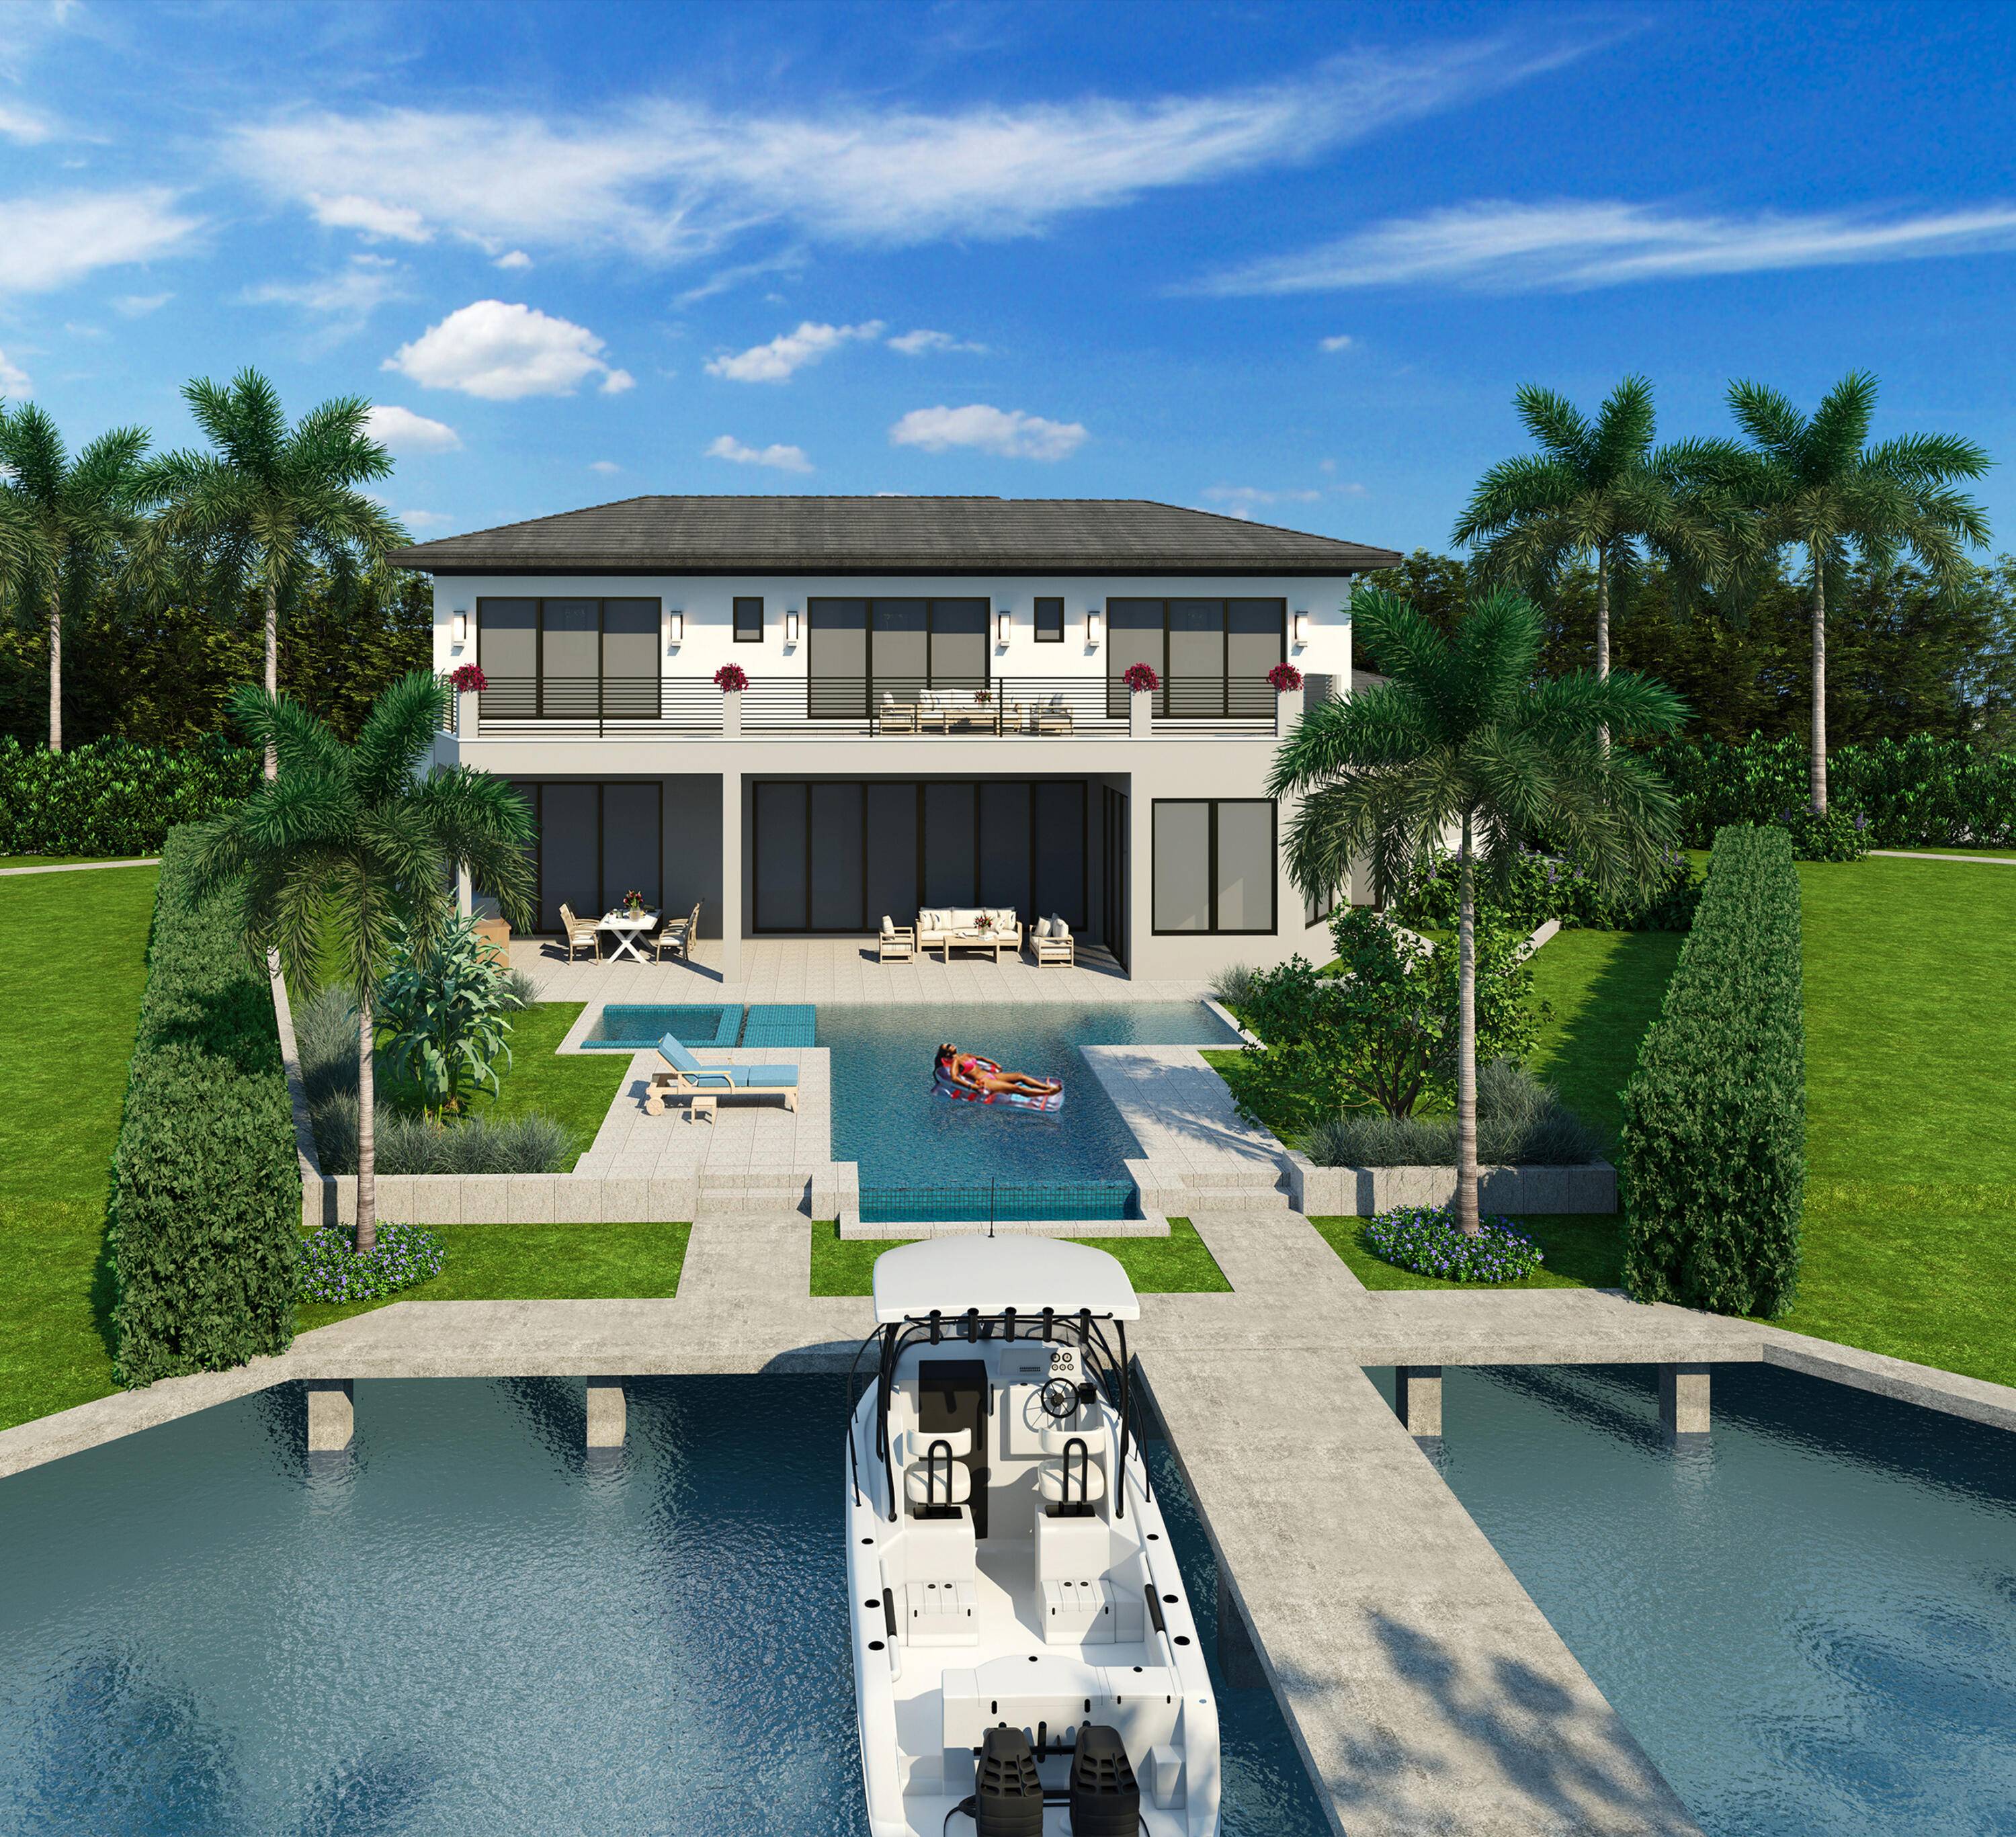 Bring your yacht and stroll to the beach, immersing yourself in the epitome of luxury at this exquisite New Construction waterfront residence.